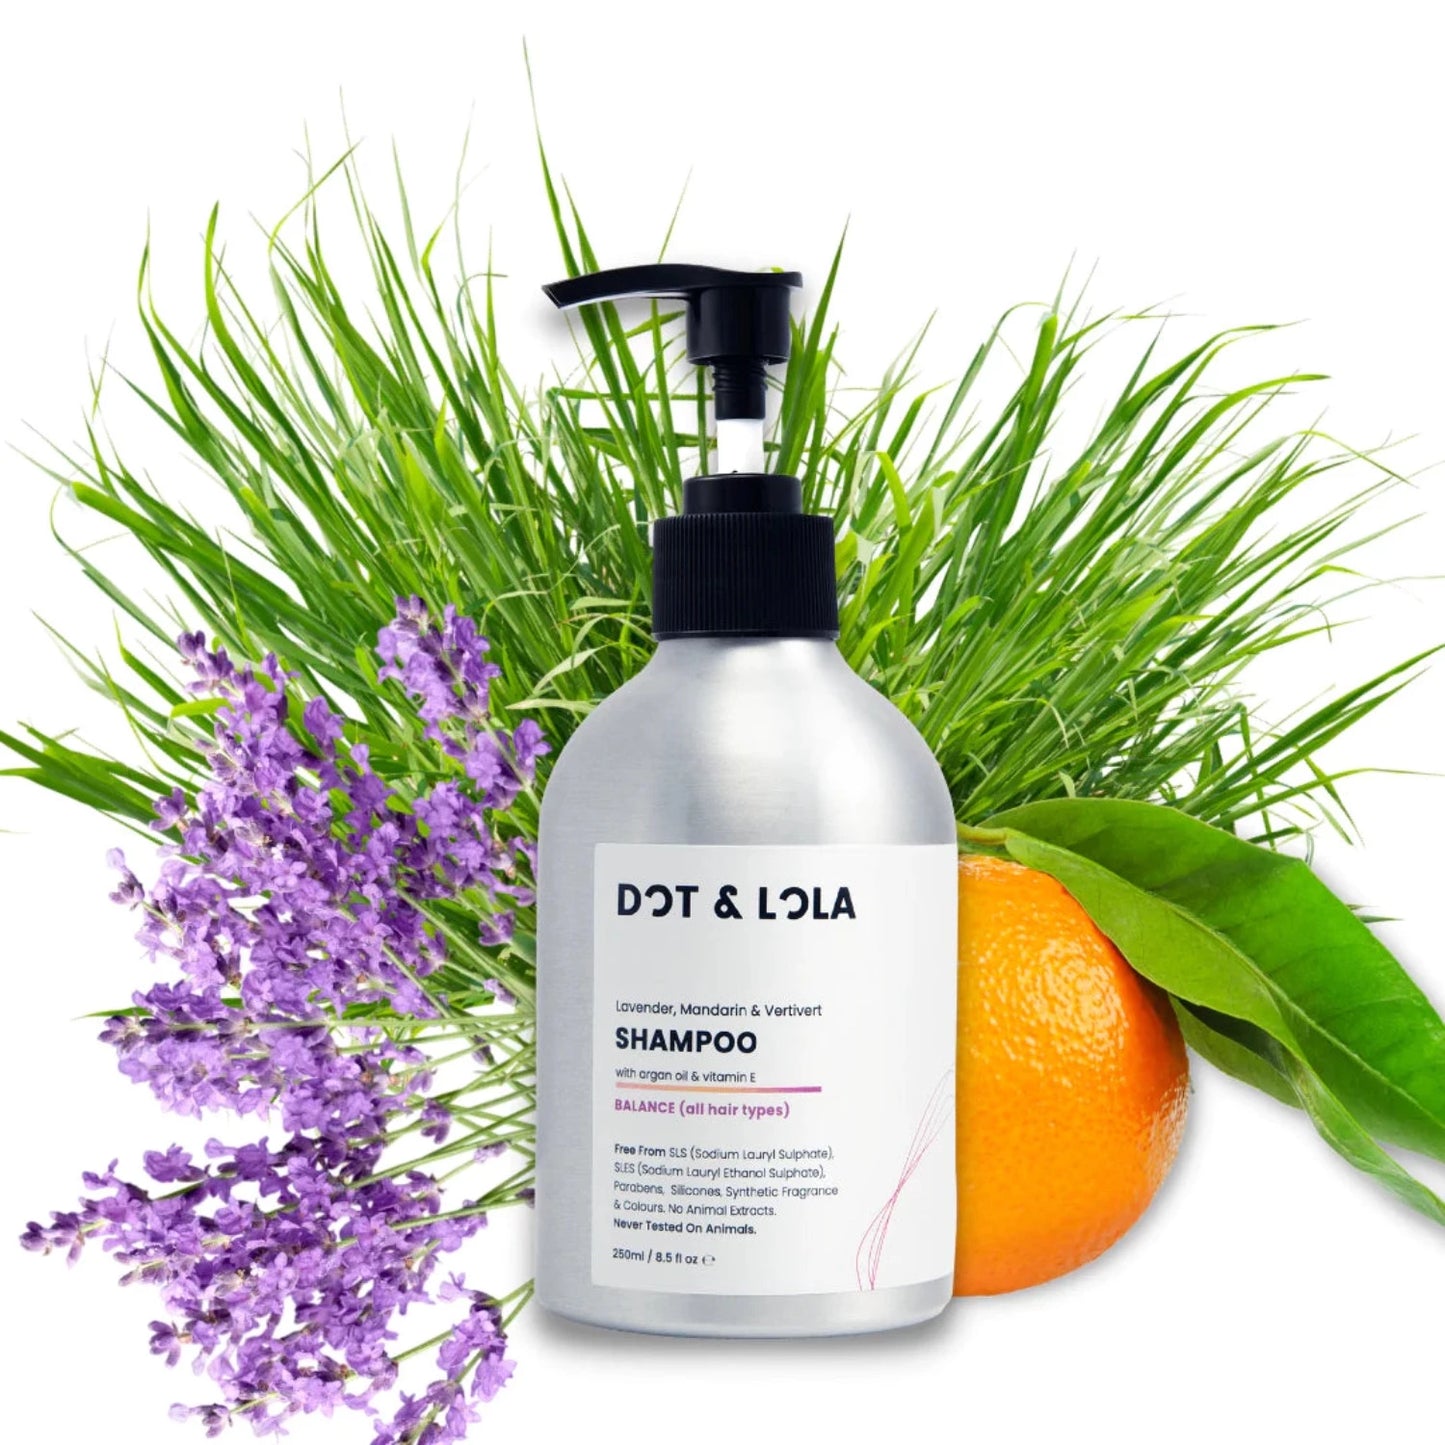 DOT & LOLA balance shampoo is suitable for all hair types, argan oil and vitamin E also help to soothe sensitive skin and skin conditions. It even supports natural hair growth.